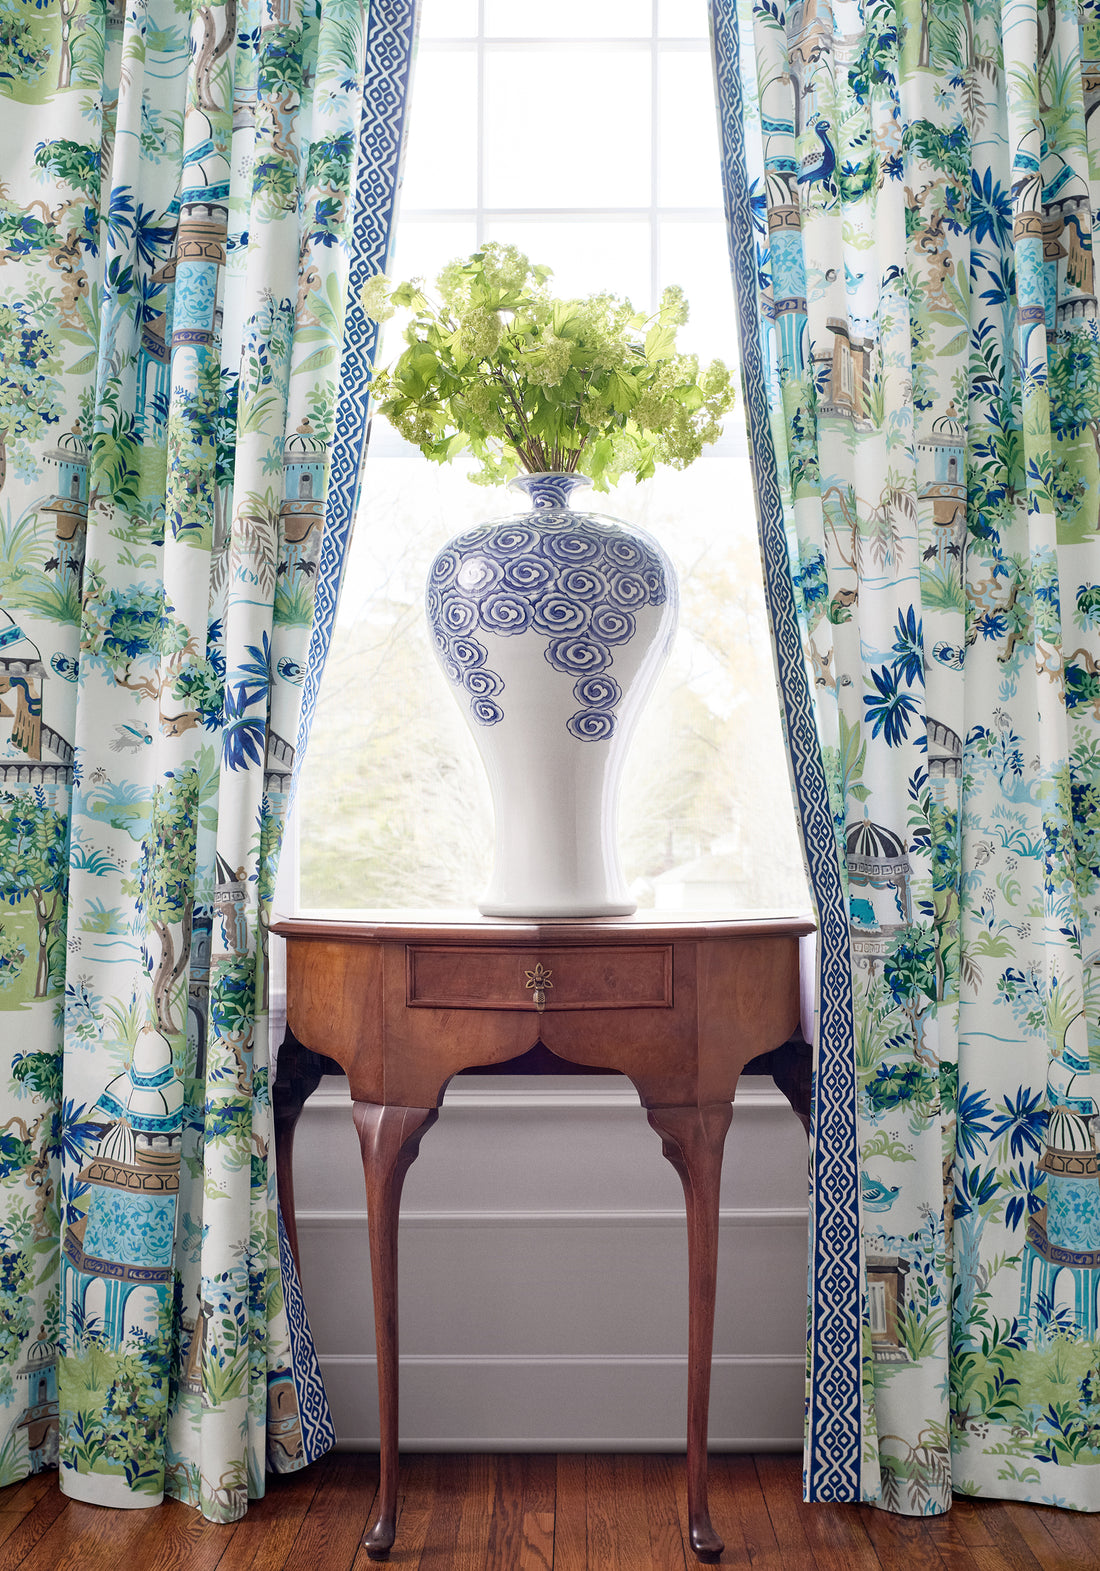 Draperies in Mystic Garden printed fabric in blue and green color - pattern number F920820 by Thibaut in the Eden collection